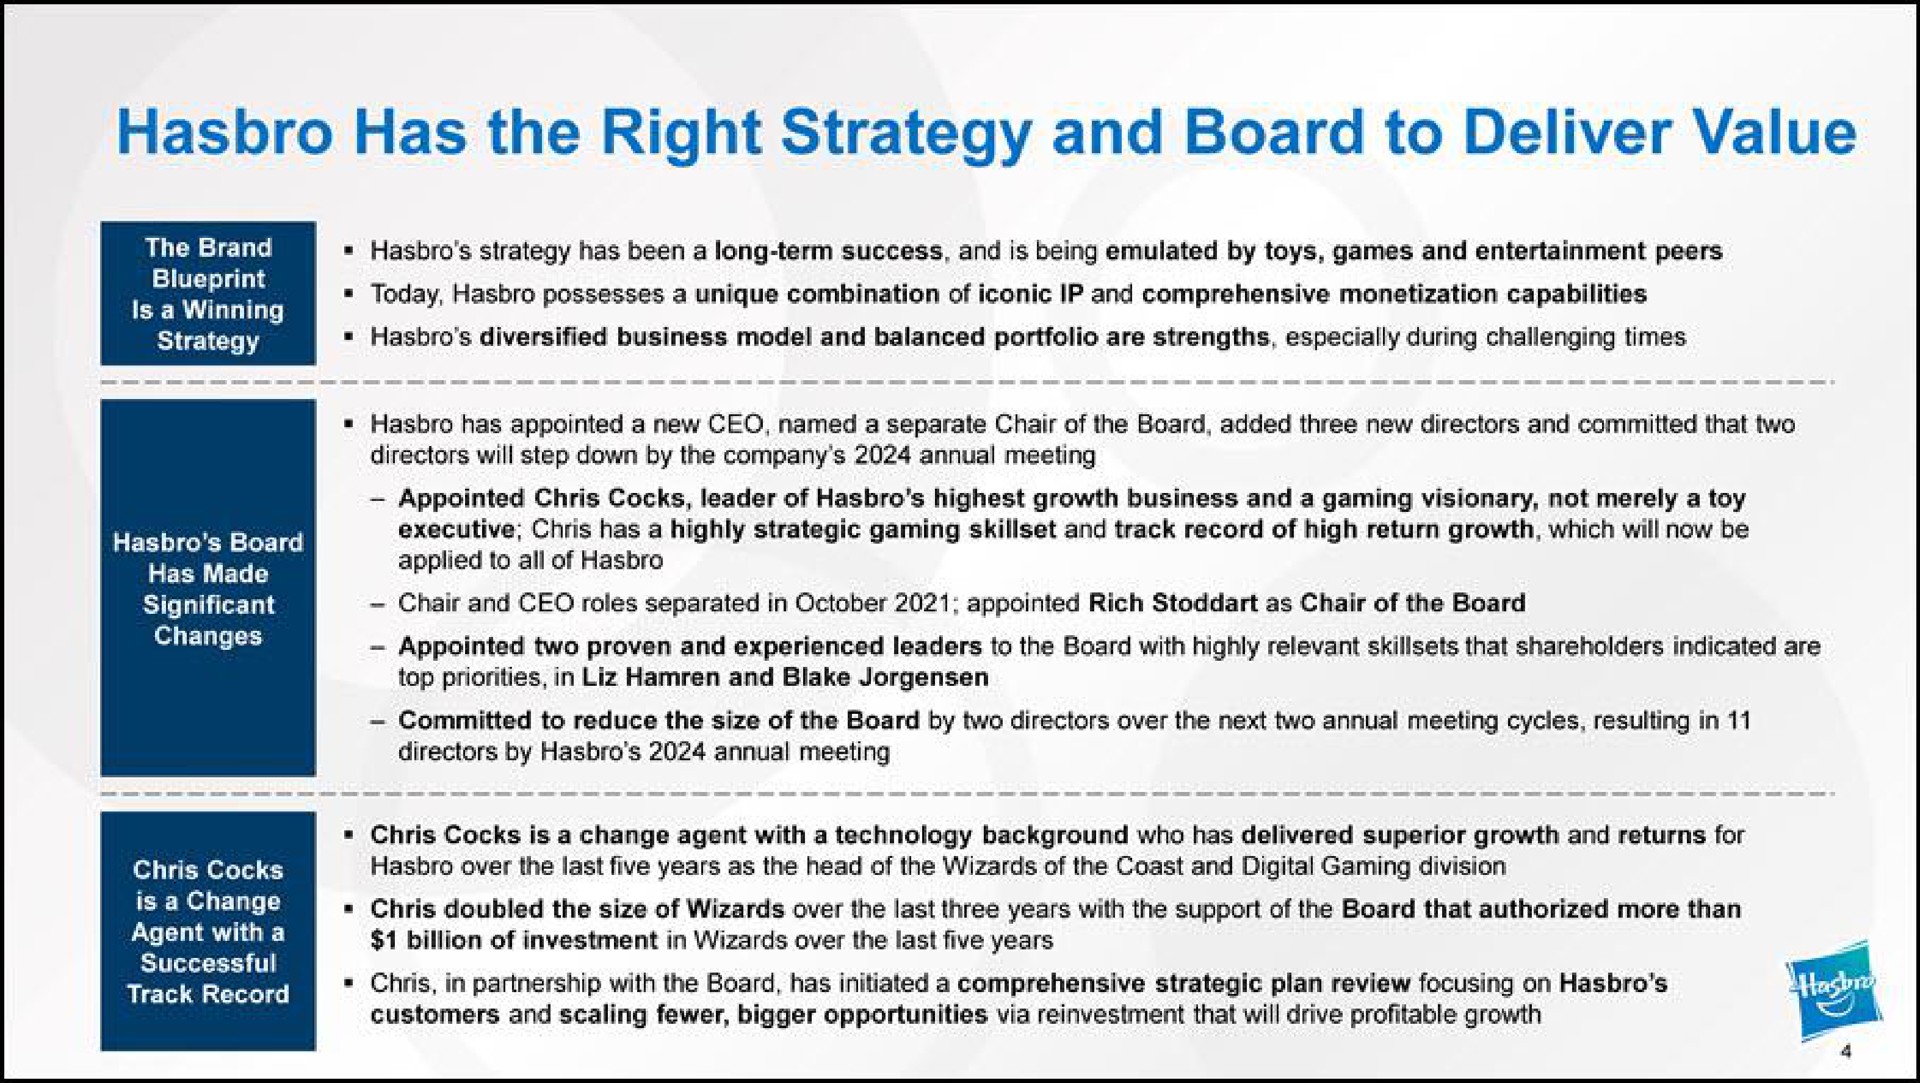 has the right strategy and board to deliver value | Hasbro